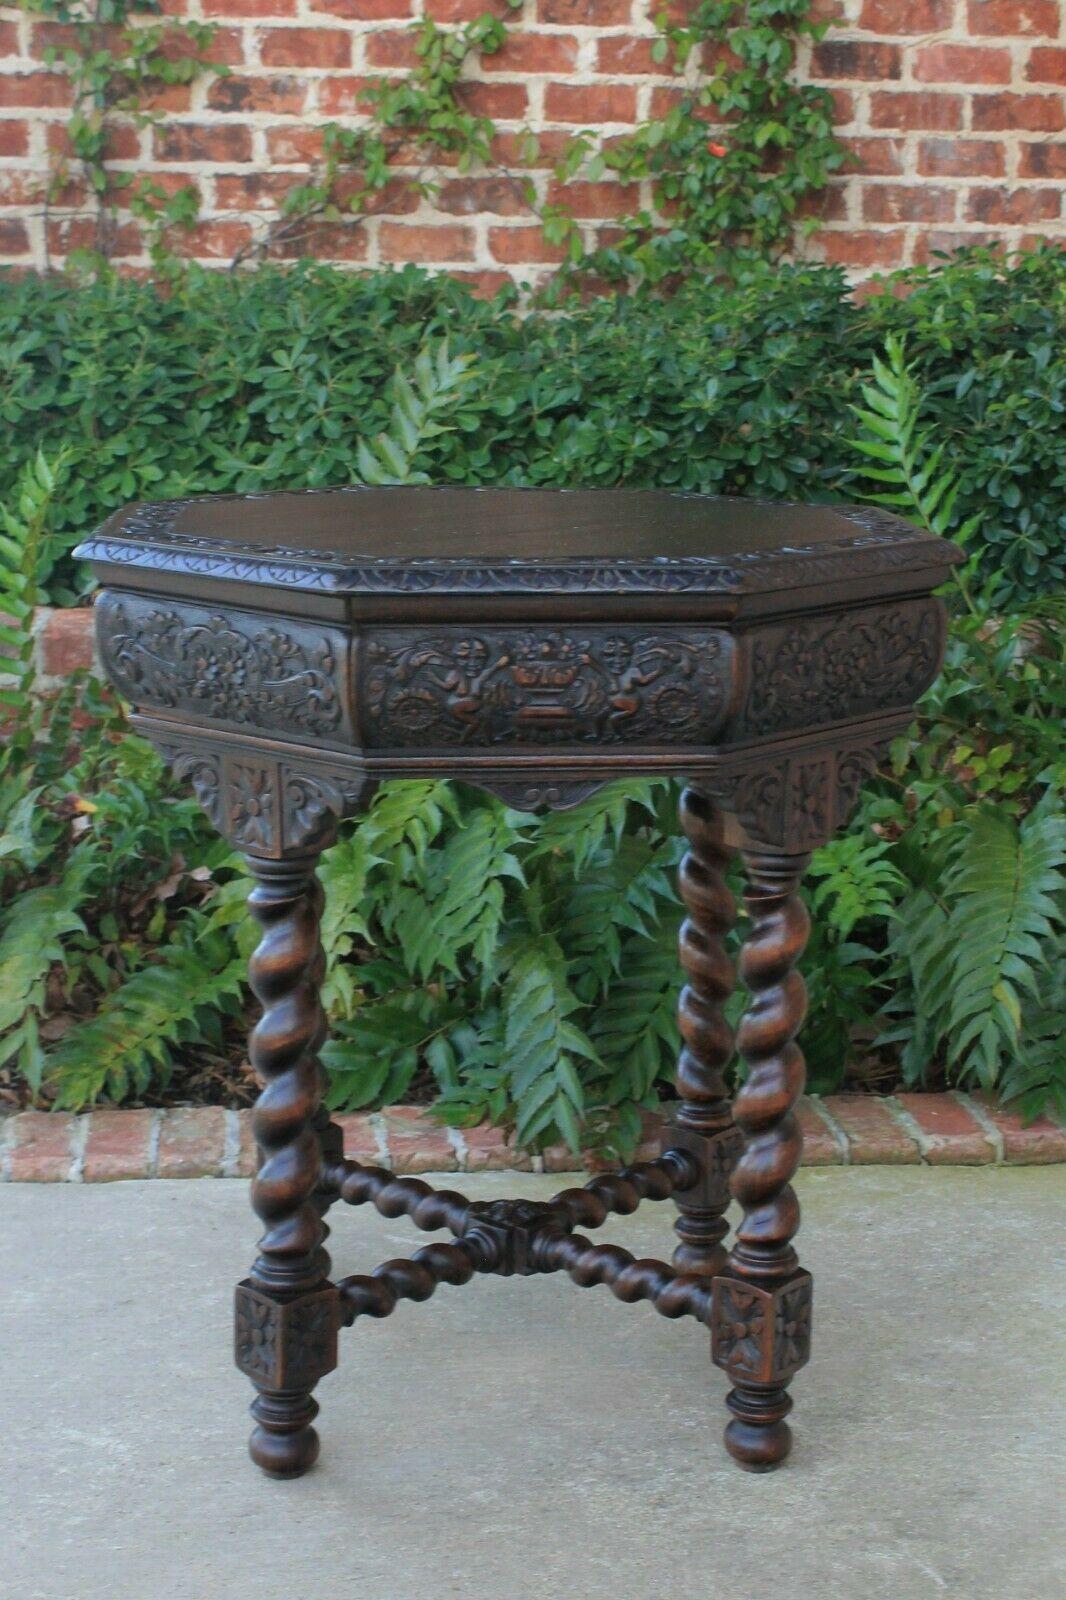 Highly Carved Late 19th Century Antique French Oak Octagonal Barley Twist Entry, Hall, Sofa, Center, Parlor or End Table ~~Victorian Era Renaissance Revival~~c. 1890s

These versatile tables were very popular in late Victorian era French country